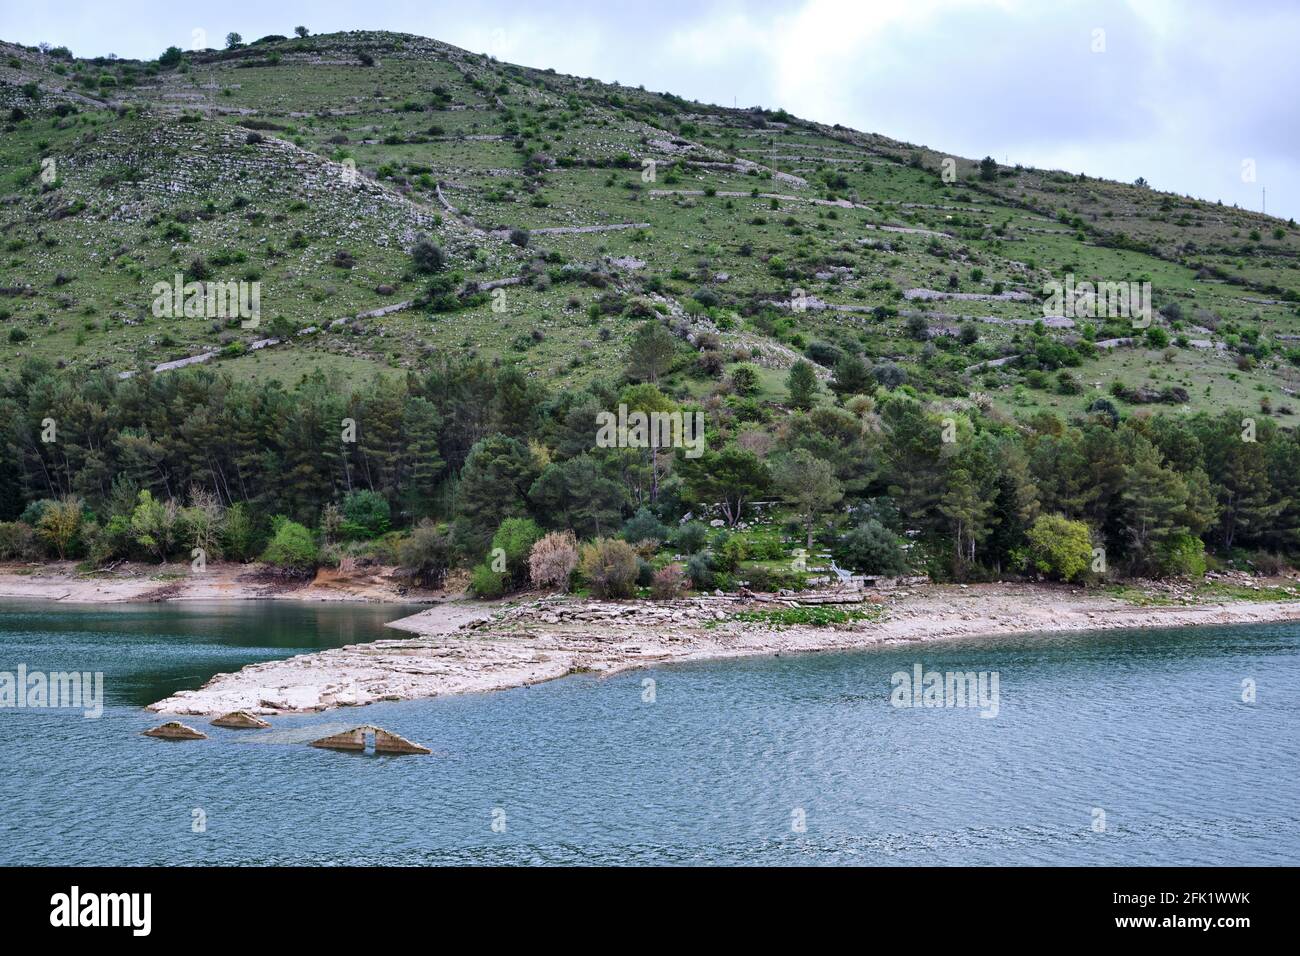 Lago di Santa Rosalia. Artificial lake and reservoir in the Iblei Mountains in the Ragusa region of Sicily. Rooftops of the submerged building showing. Stock Photo